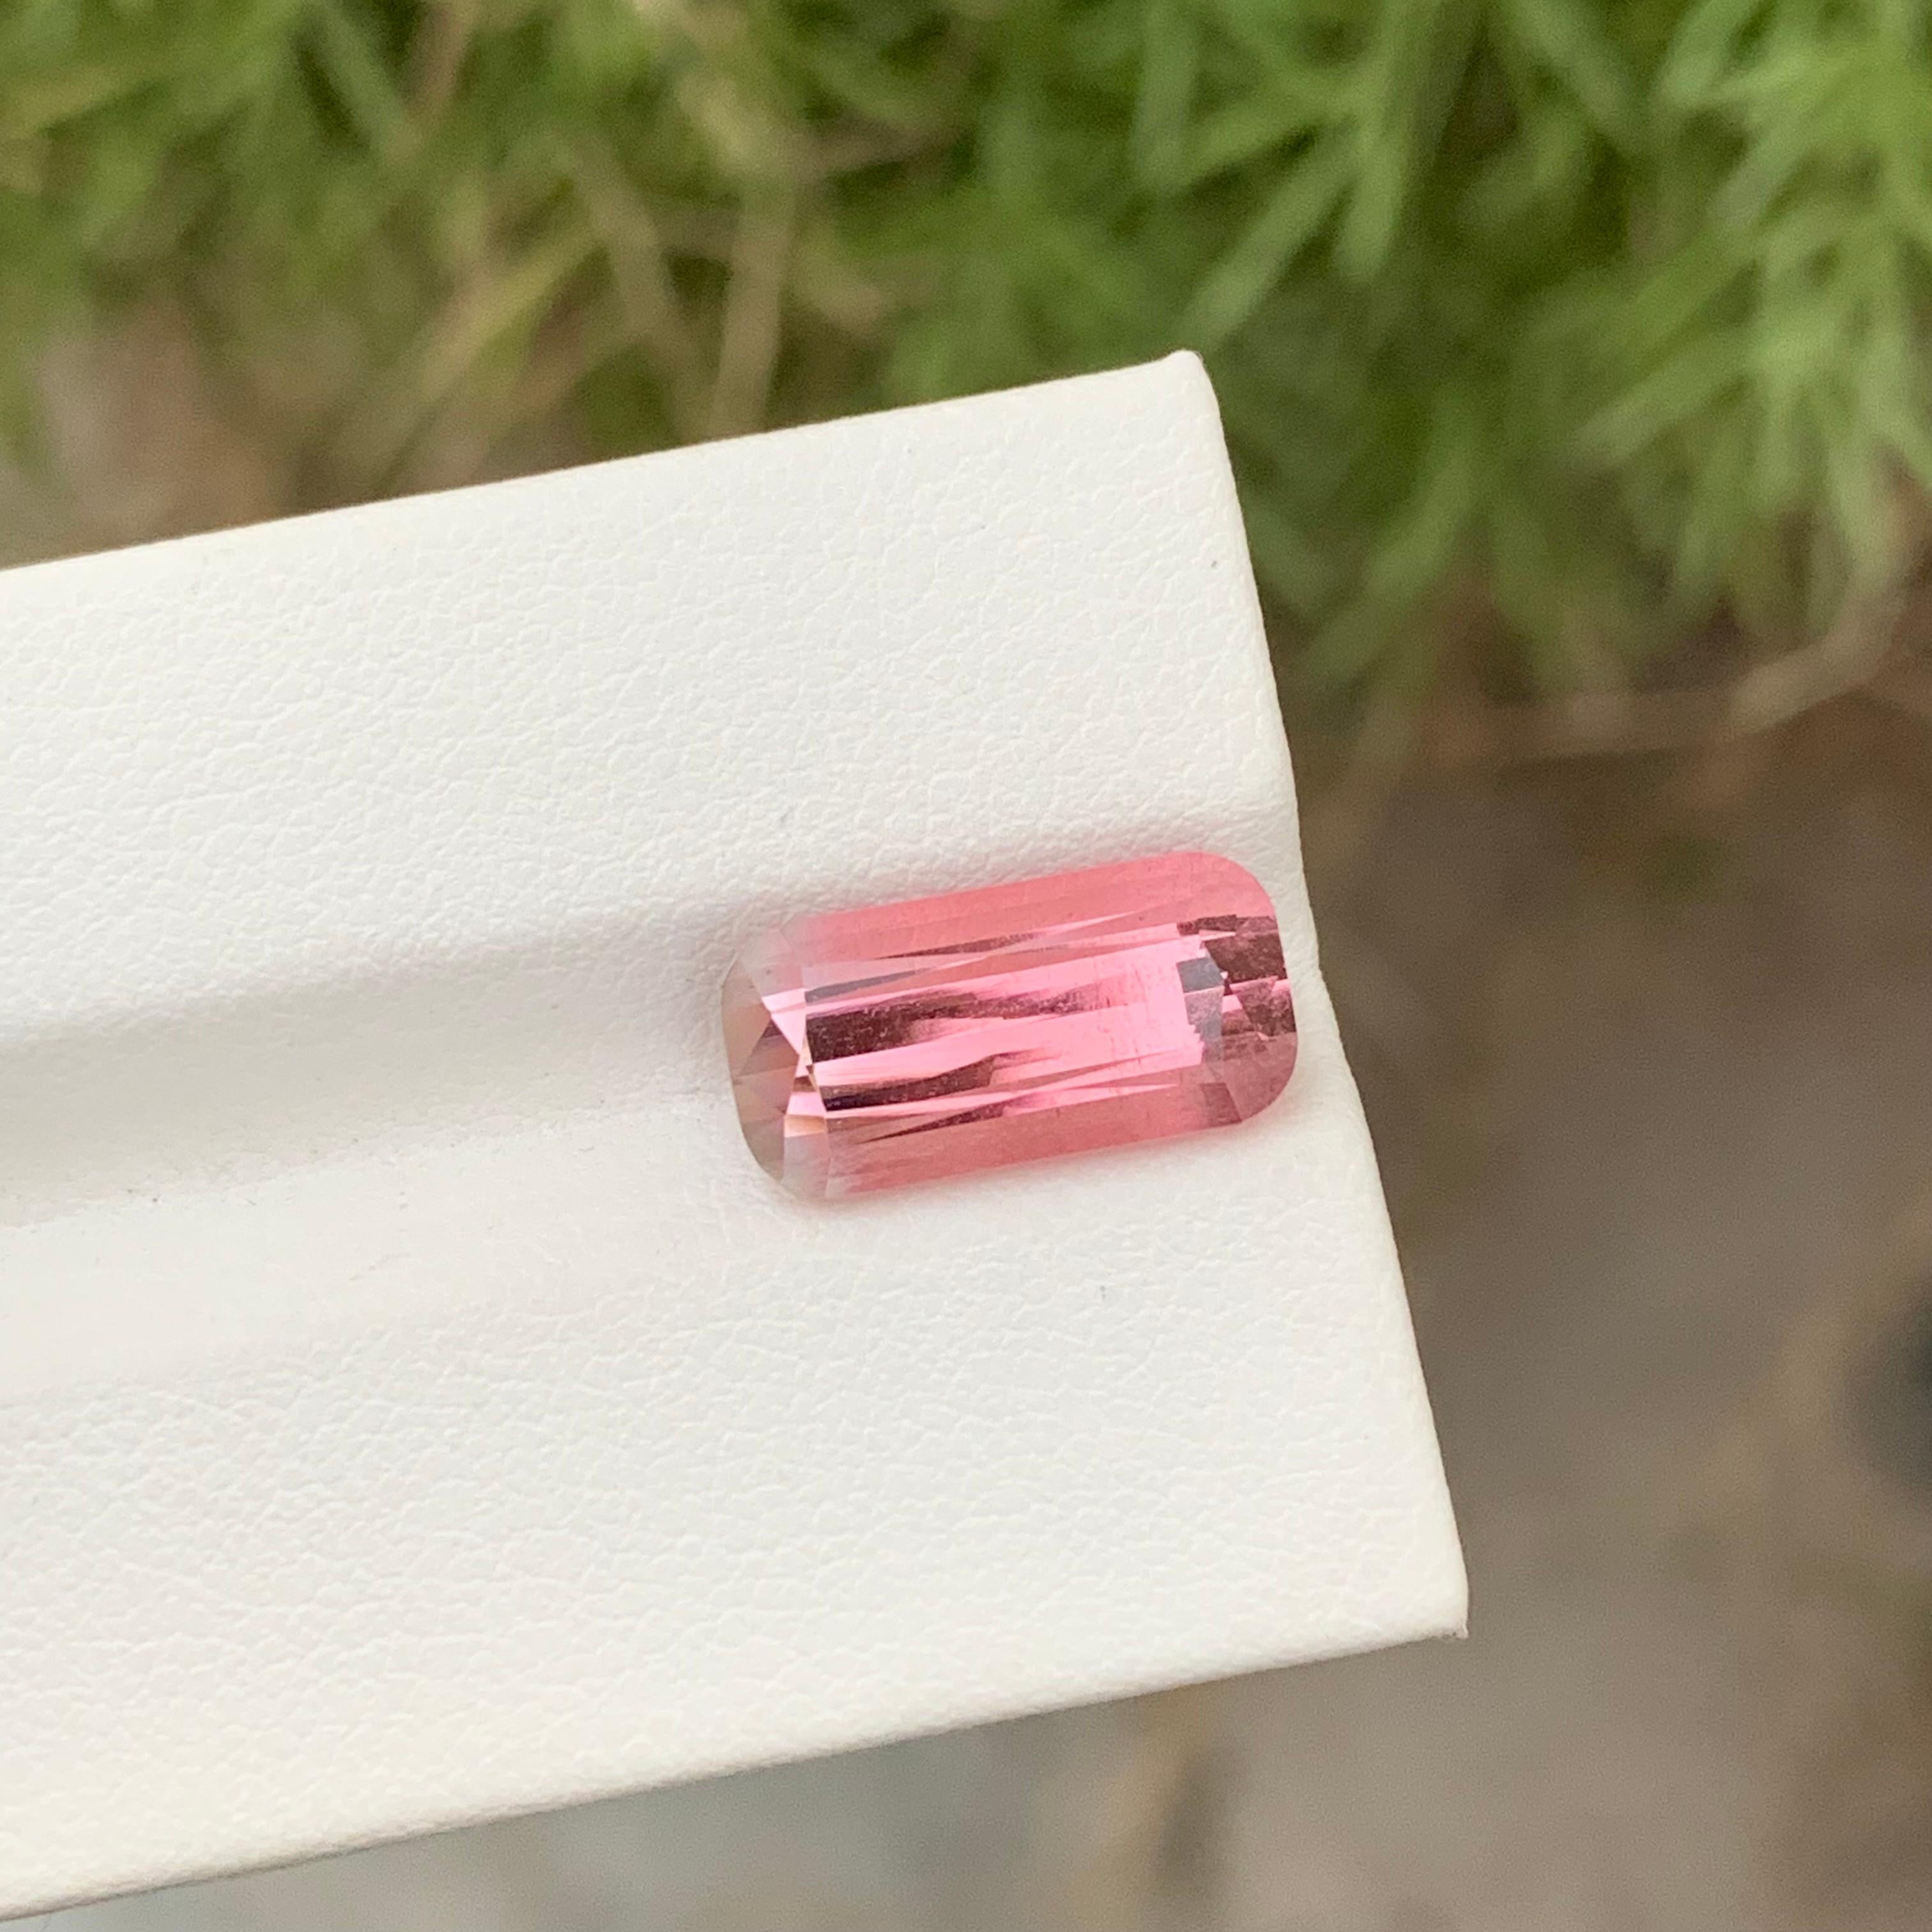 Arts and Crafts 6.05 Carat Natural Loose Baby Pink Tourmaline Paprook Afghanistan Mine For Sale